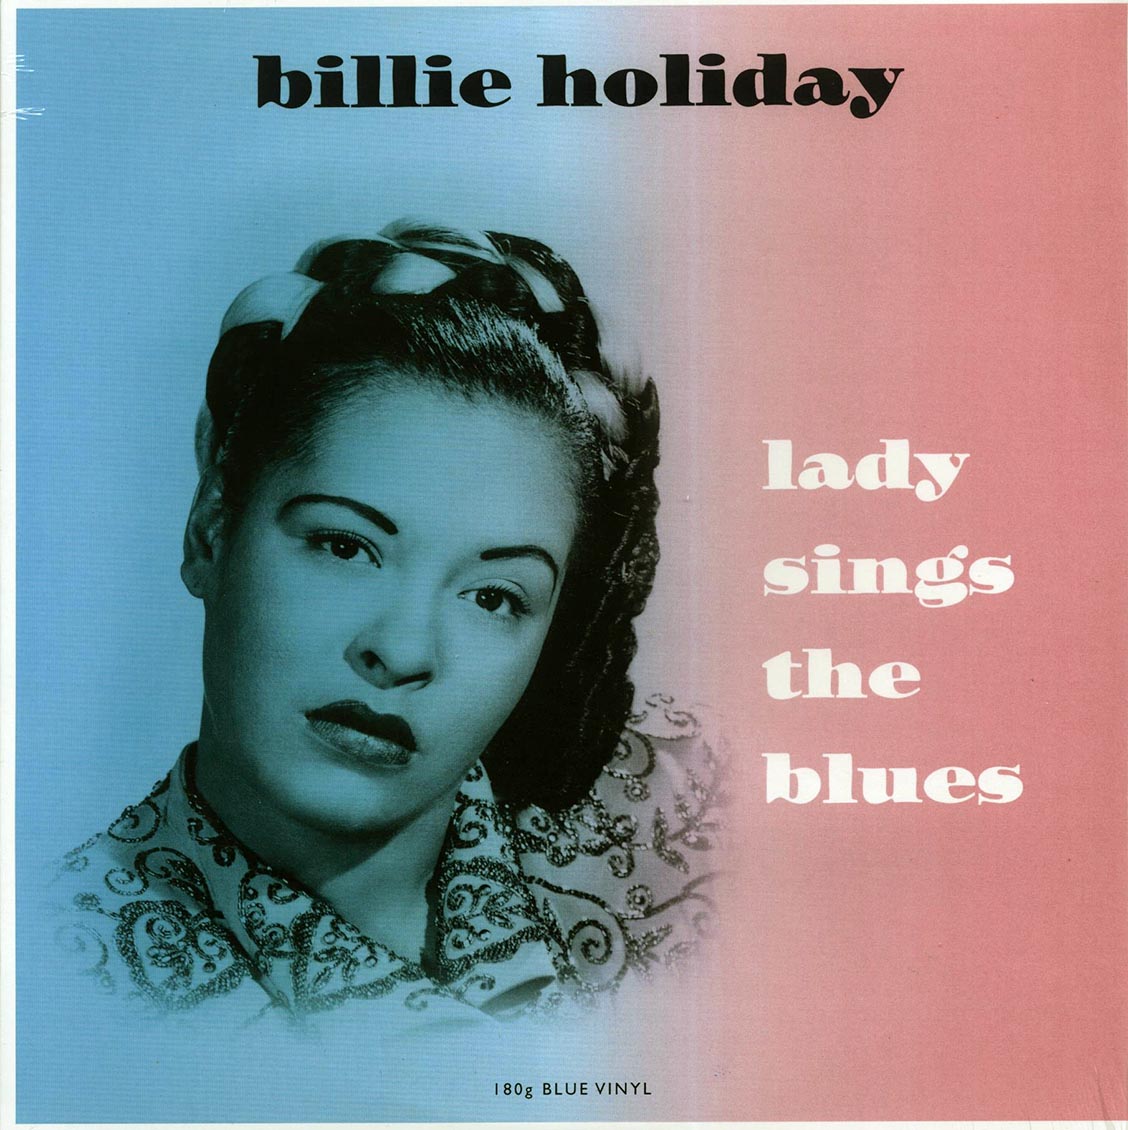 holiday lady sings the blues